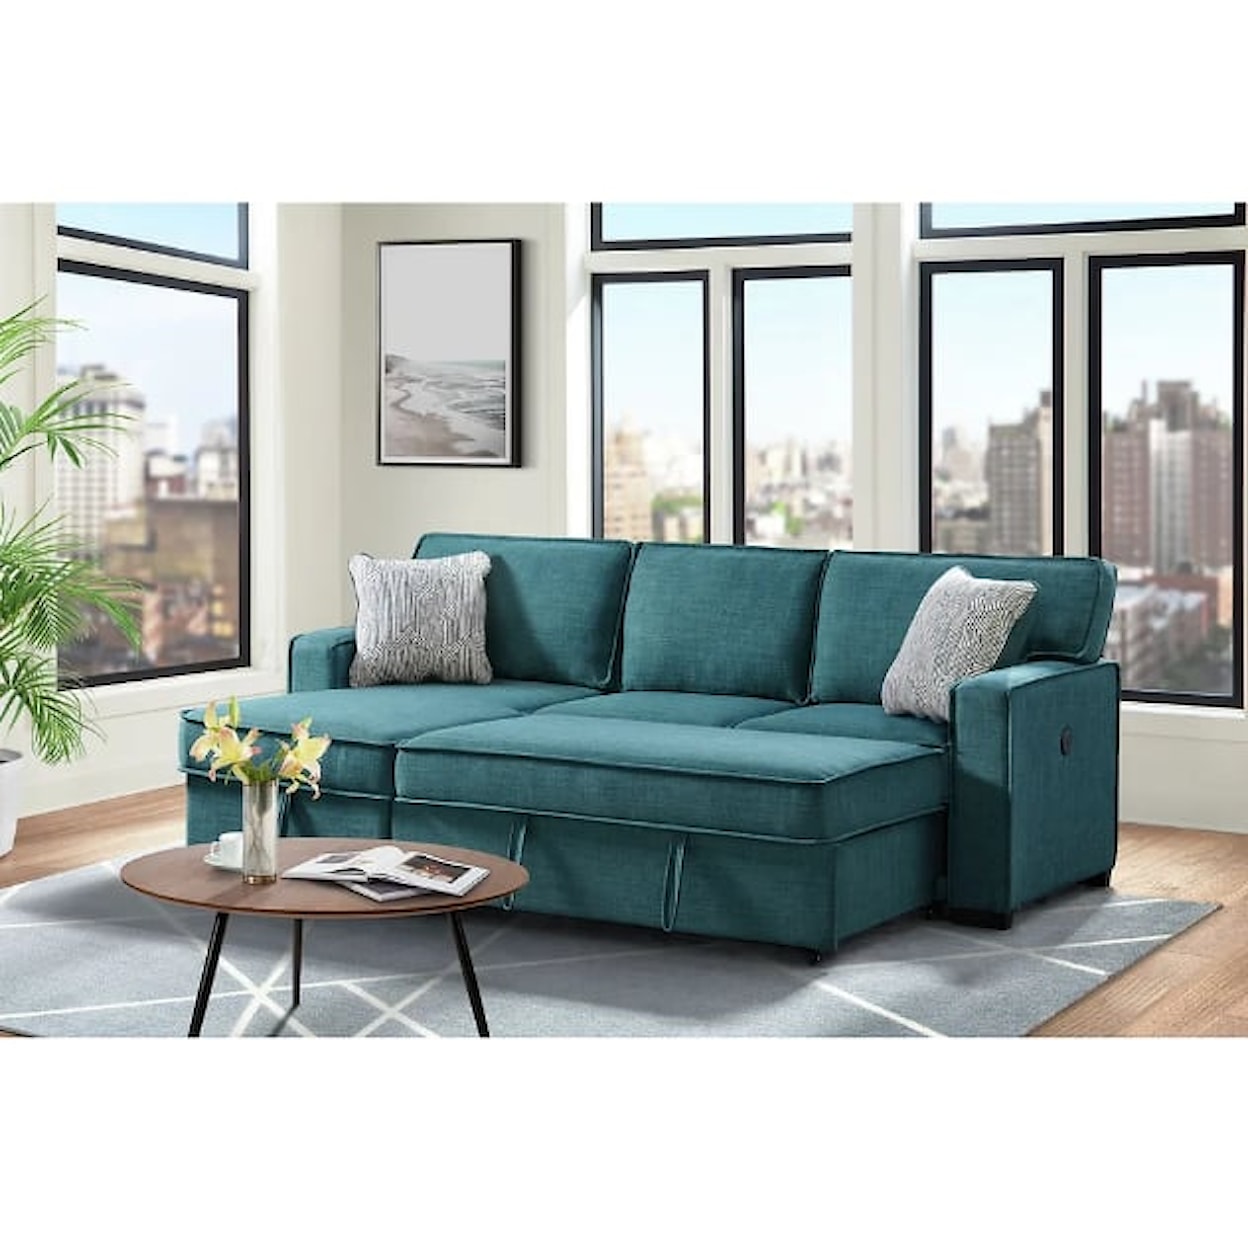 Elements International Venzy VENZY TEAL SOFA CHAISE WITH PULL | OUT BED